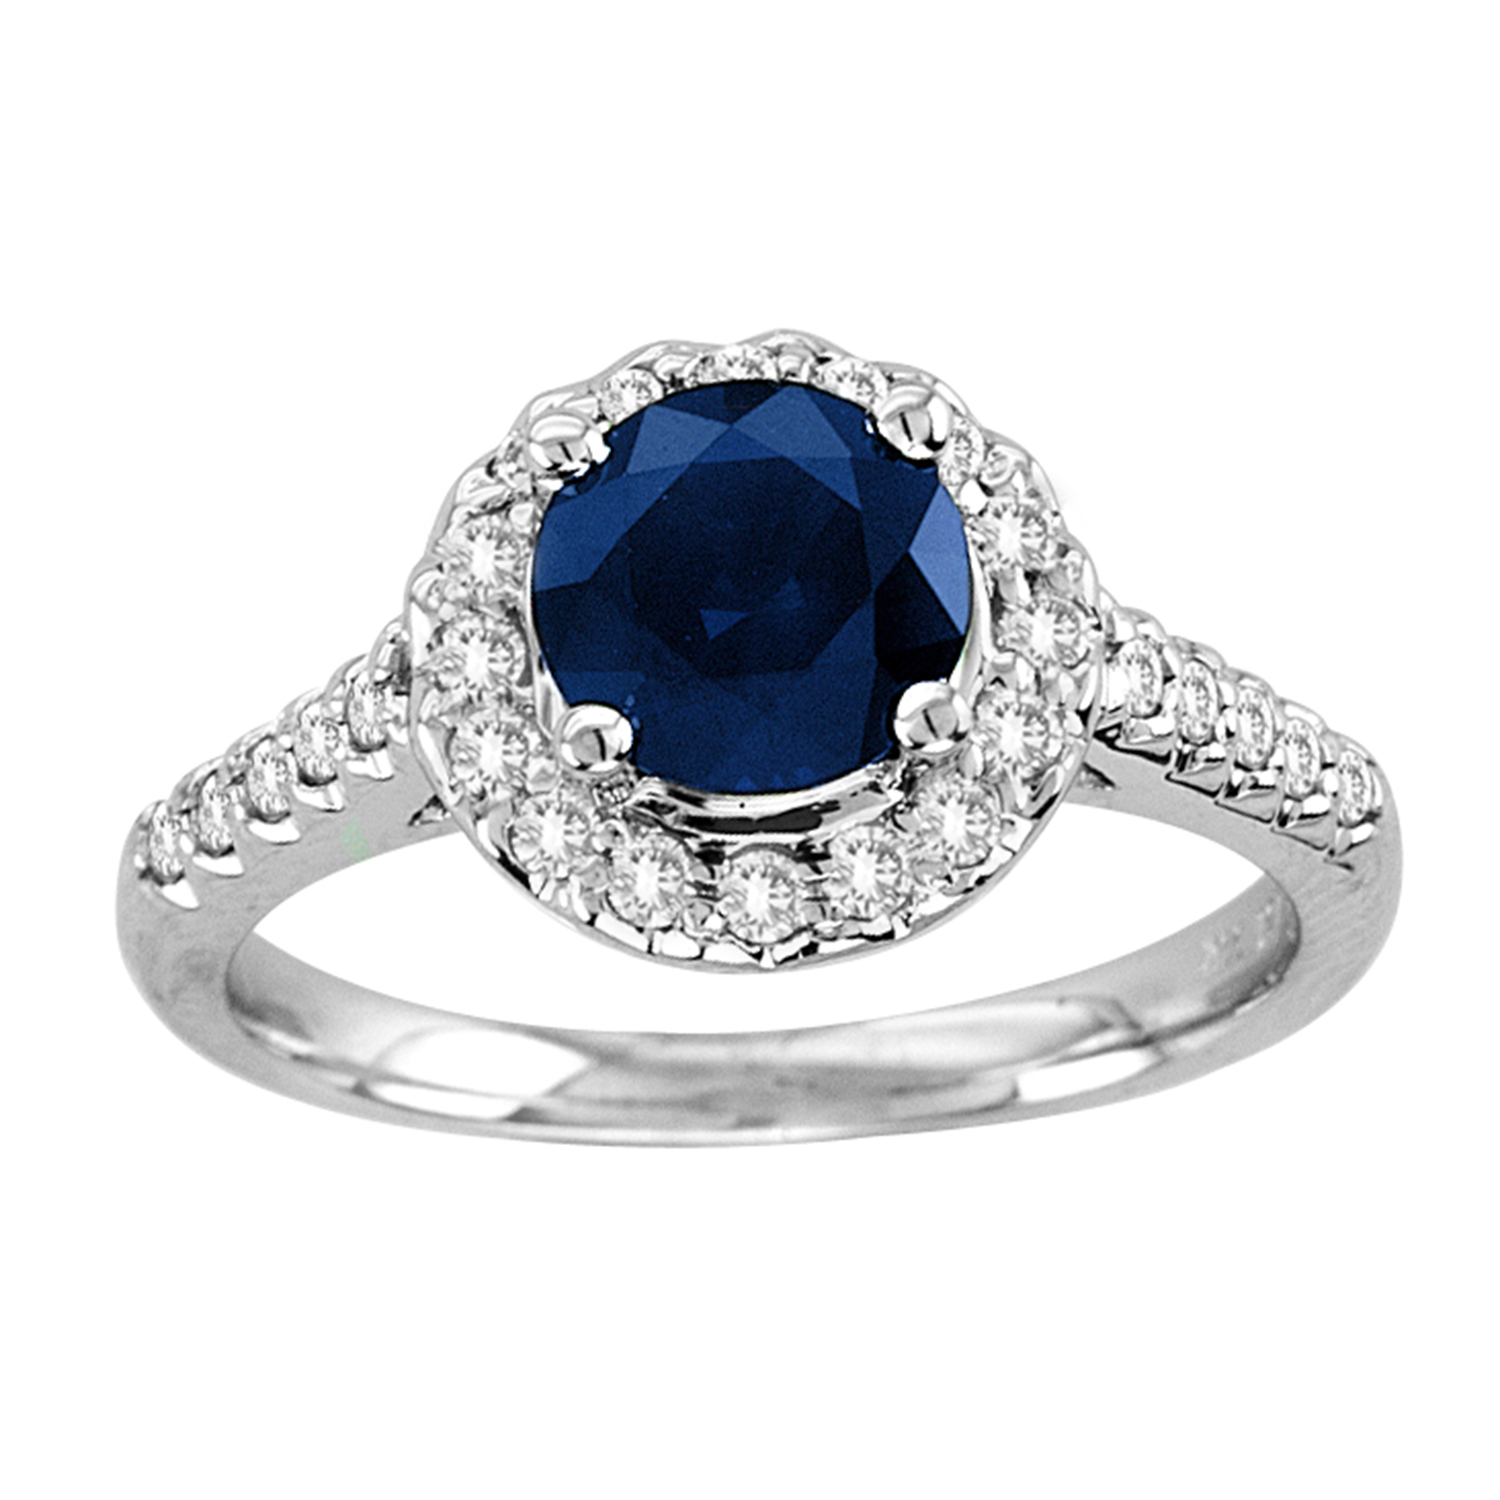 View 2.00cttw Sapphire and Diamond Engagement Ring set in 14k Gold